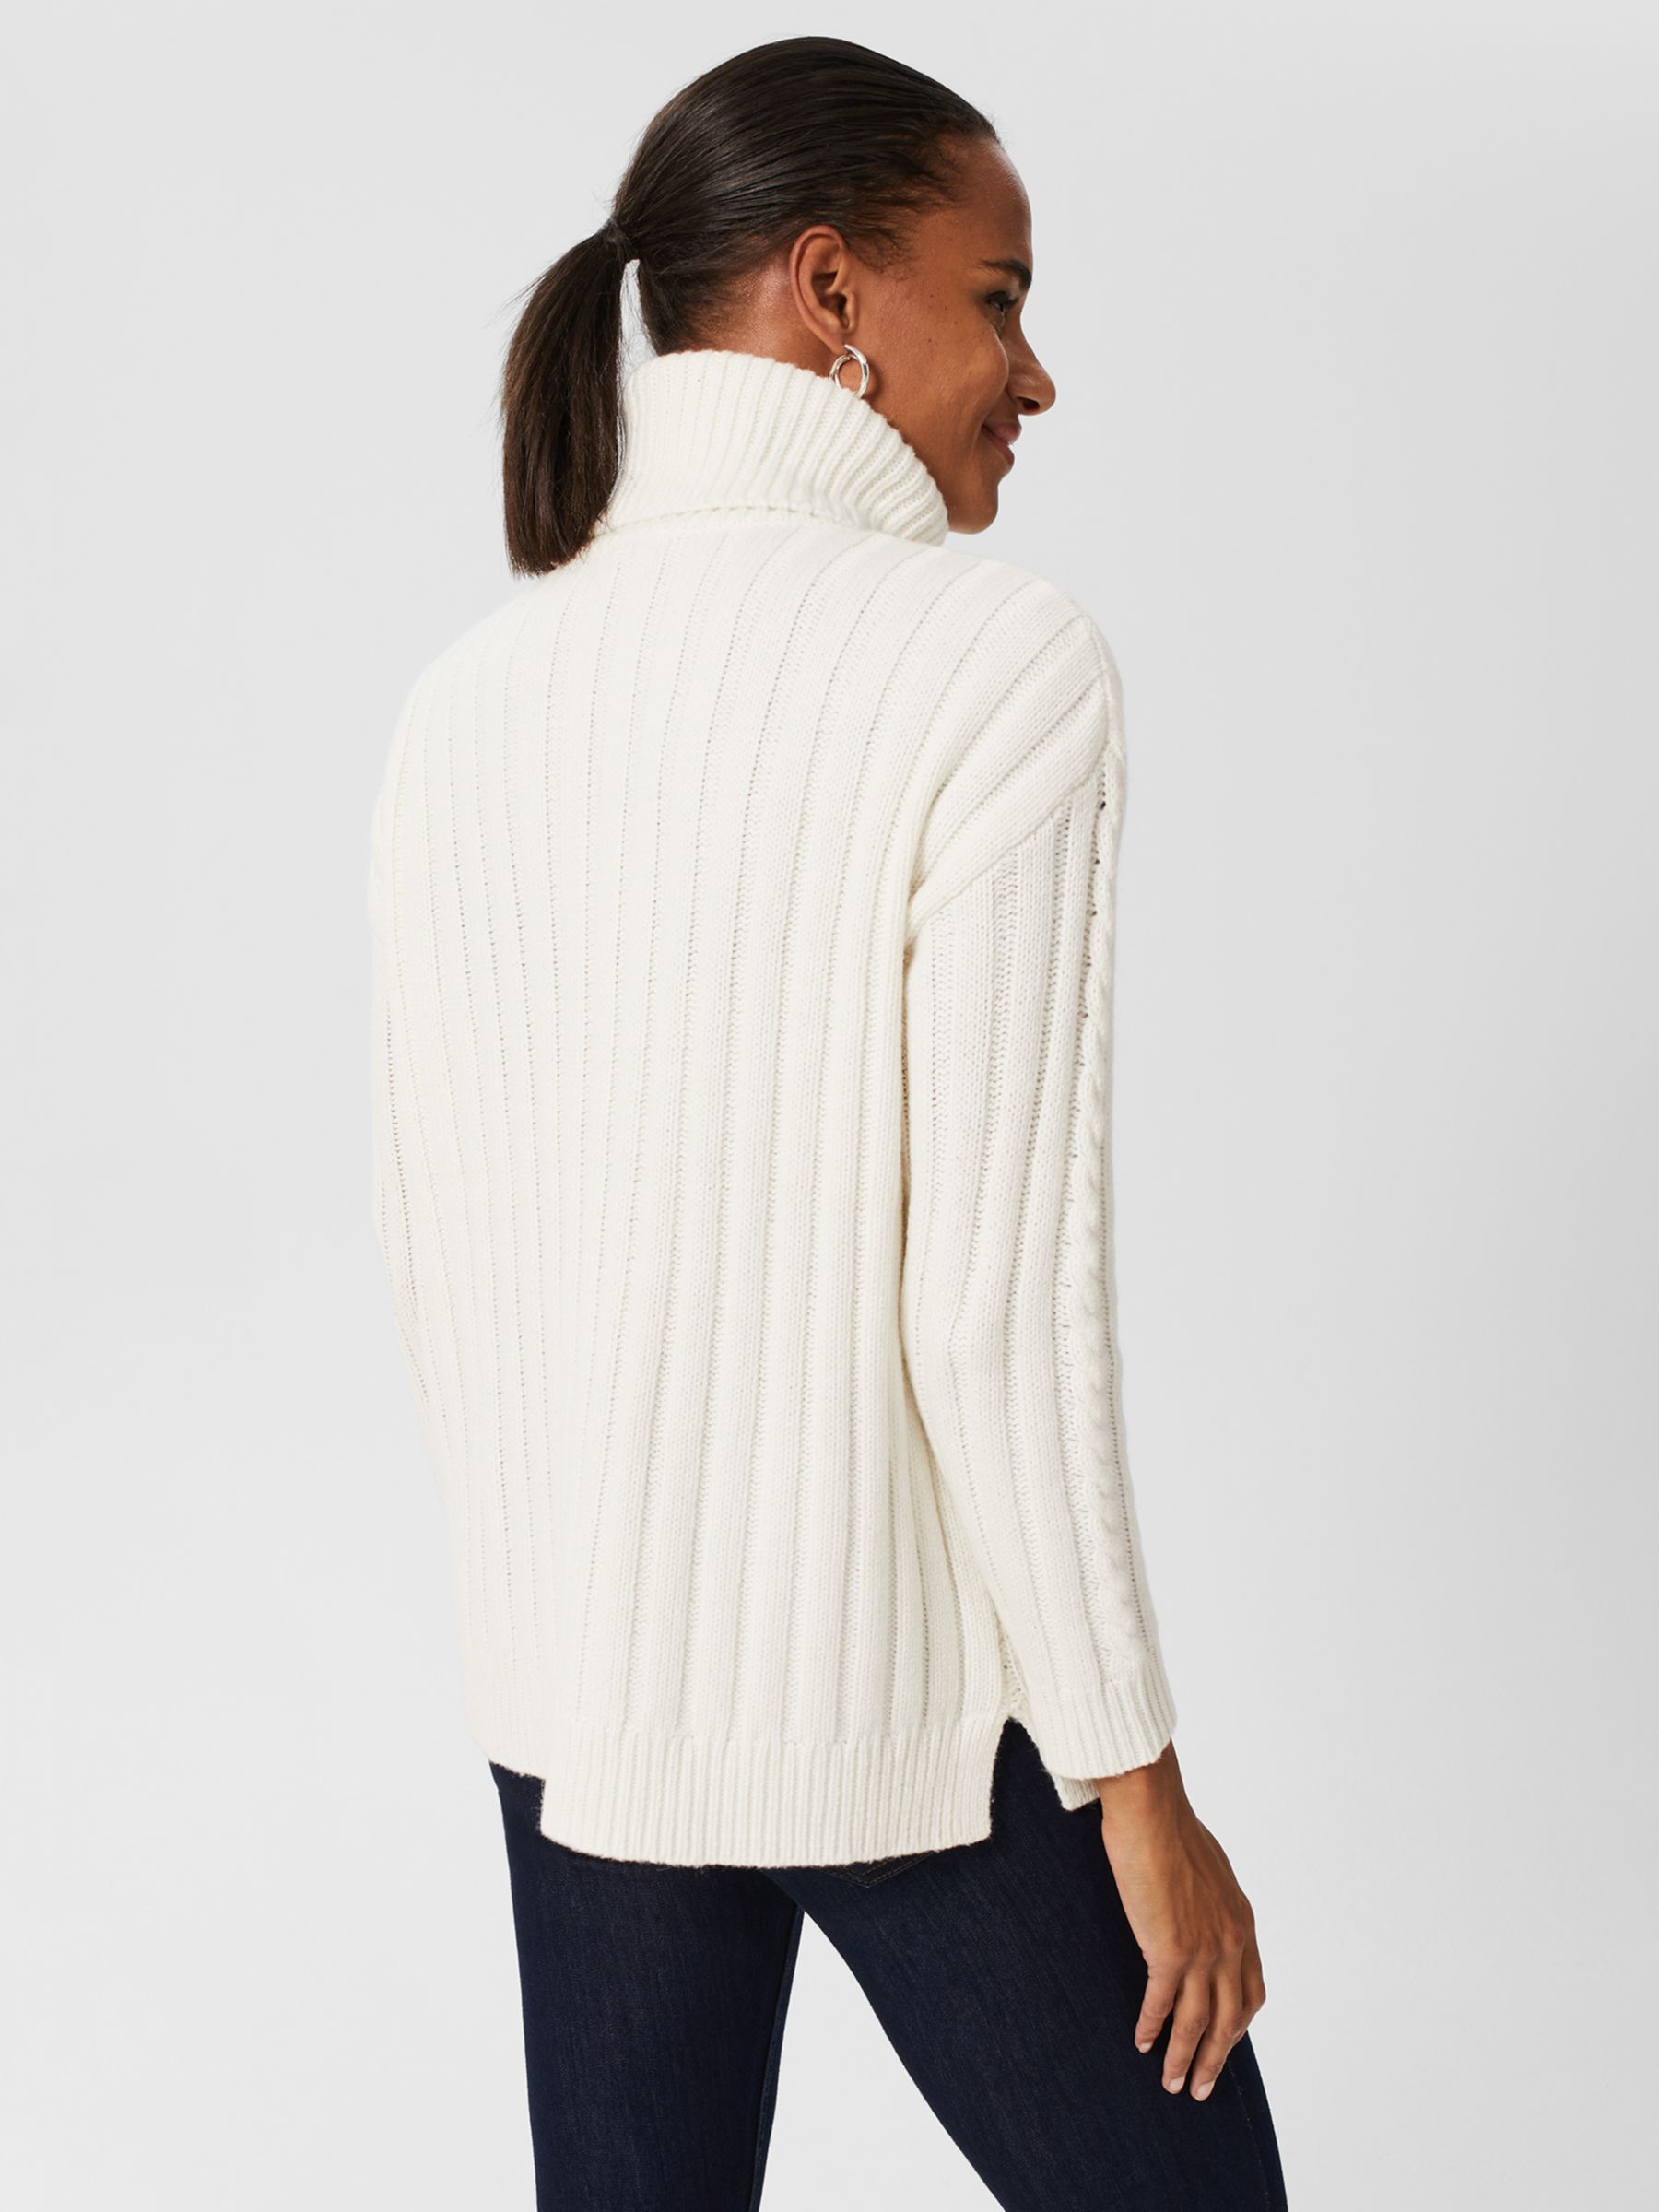 Hobbs Lana Roll Neck Knitted Jumper, Ivory at John Lewis & Partners